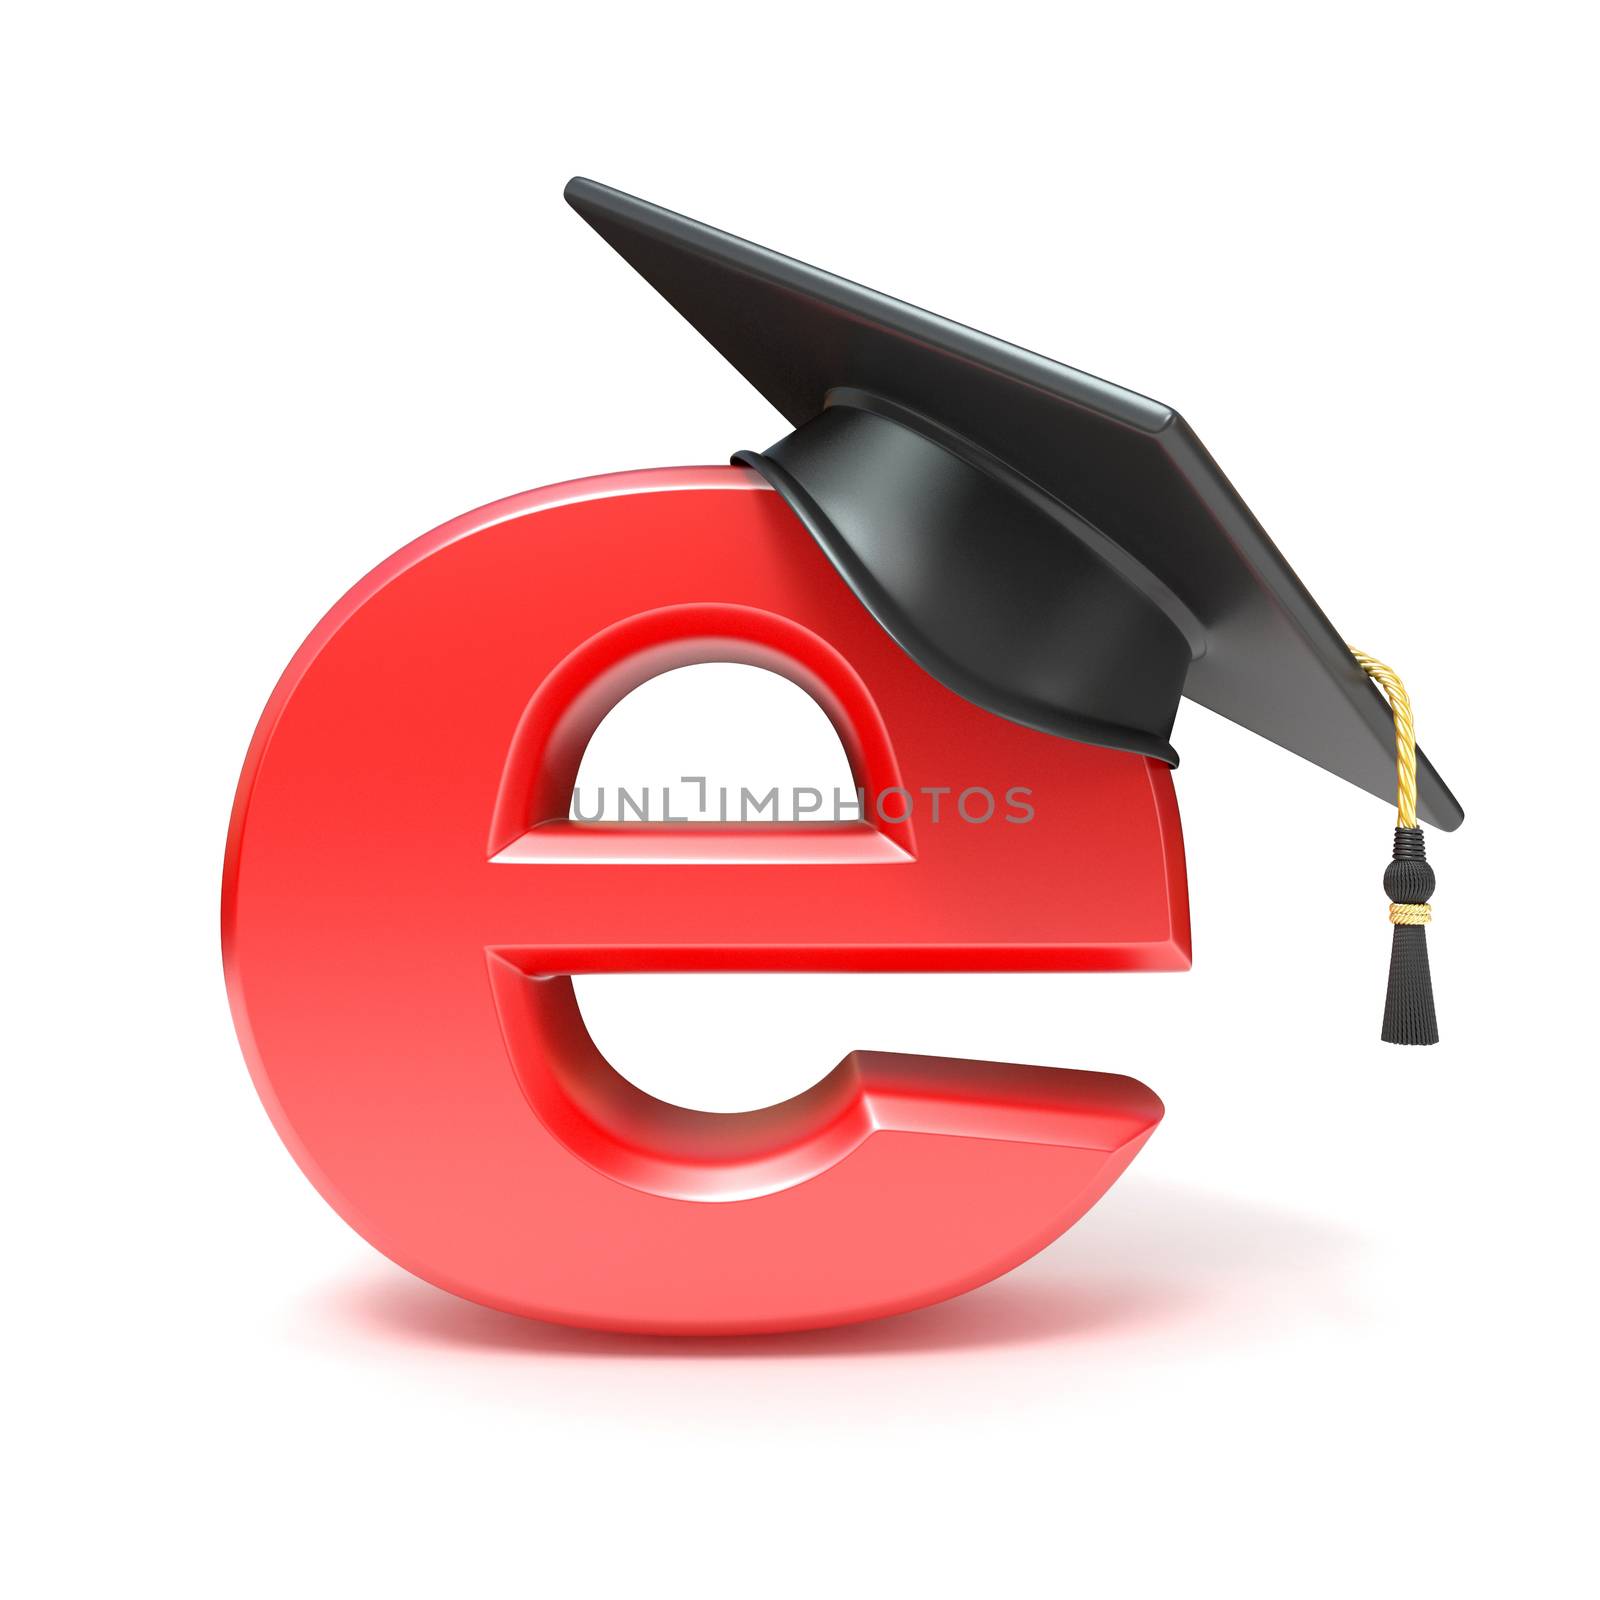 Graduation hat on E. E-learning concept. 3D by djmilic